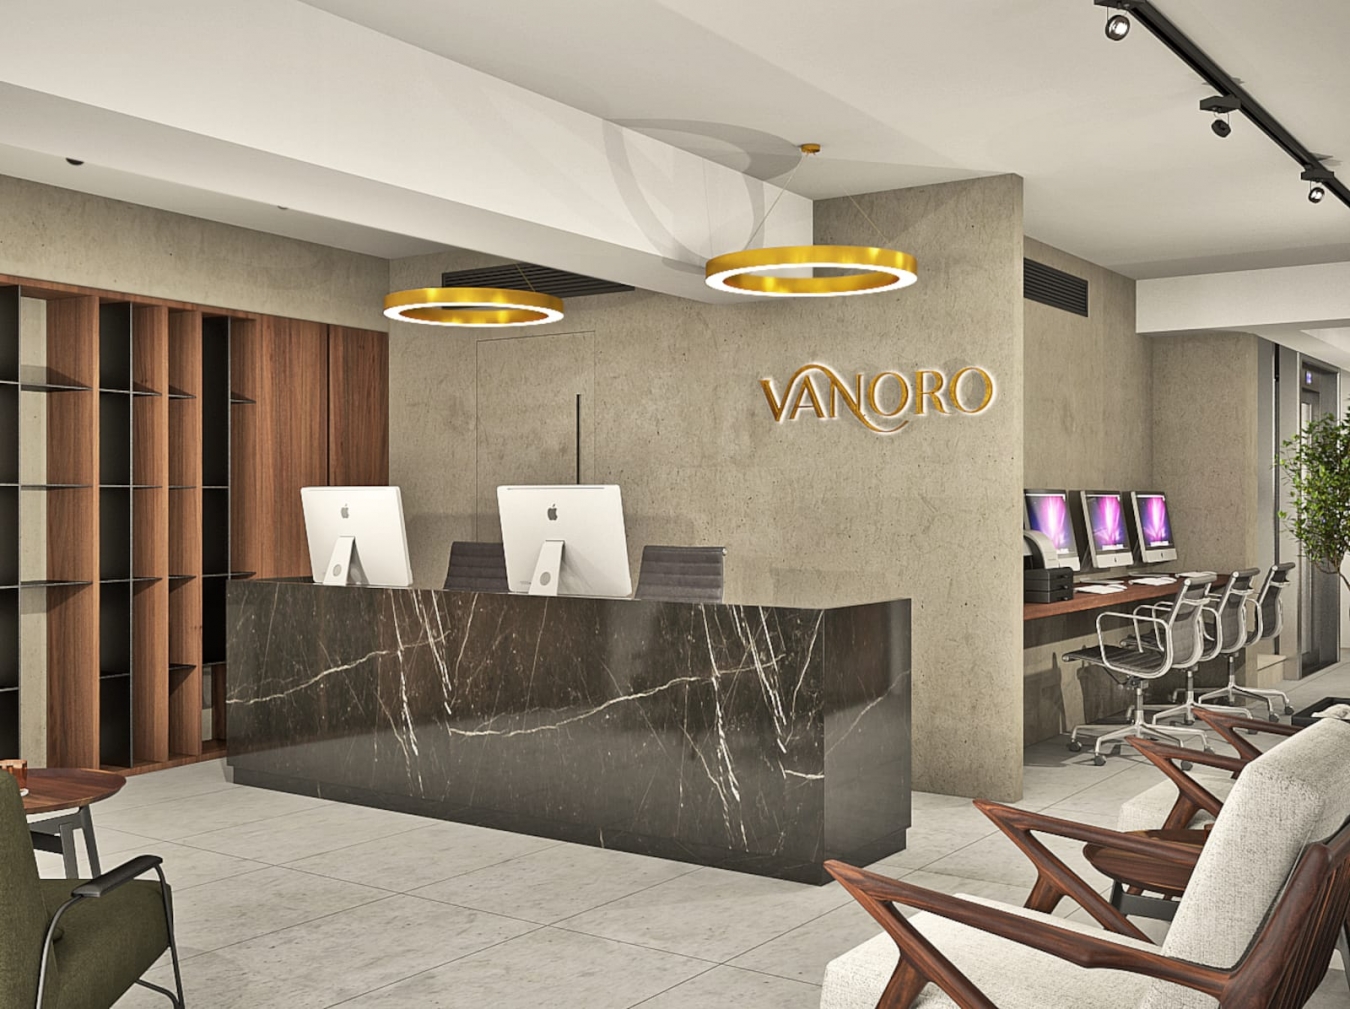 Vanoro Hotel: From an abandoned tobacco warehouse to a brand-new hospitality experience